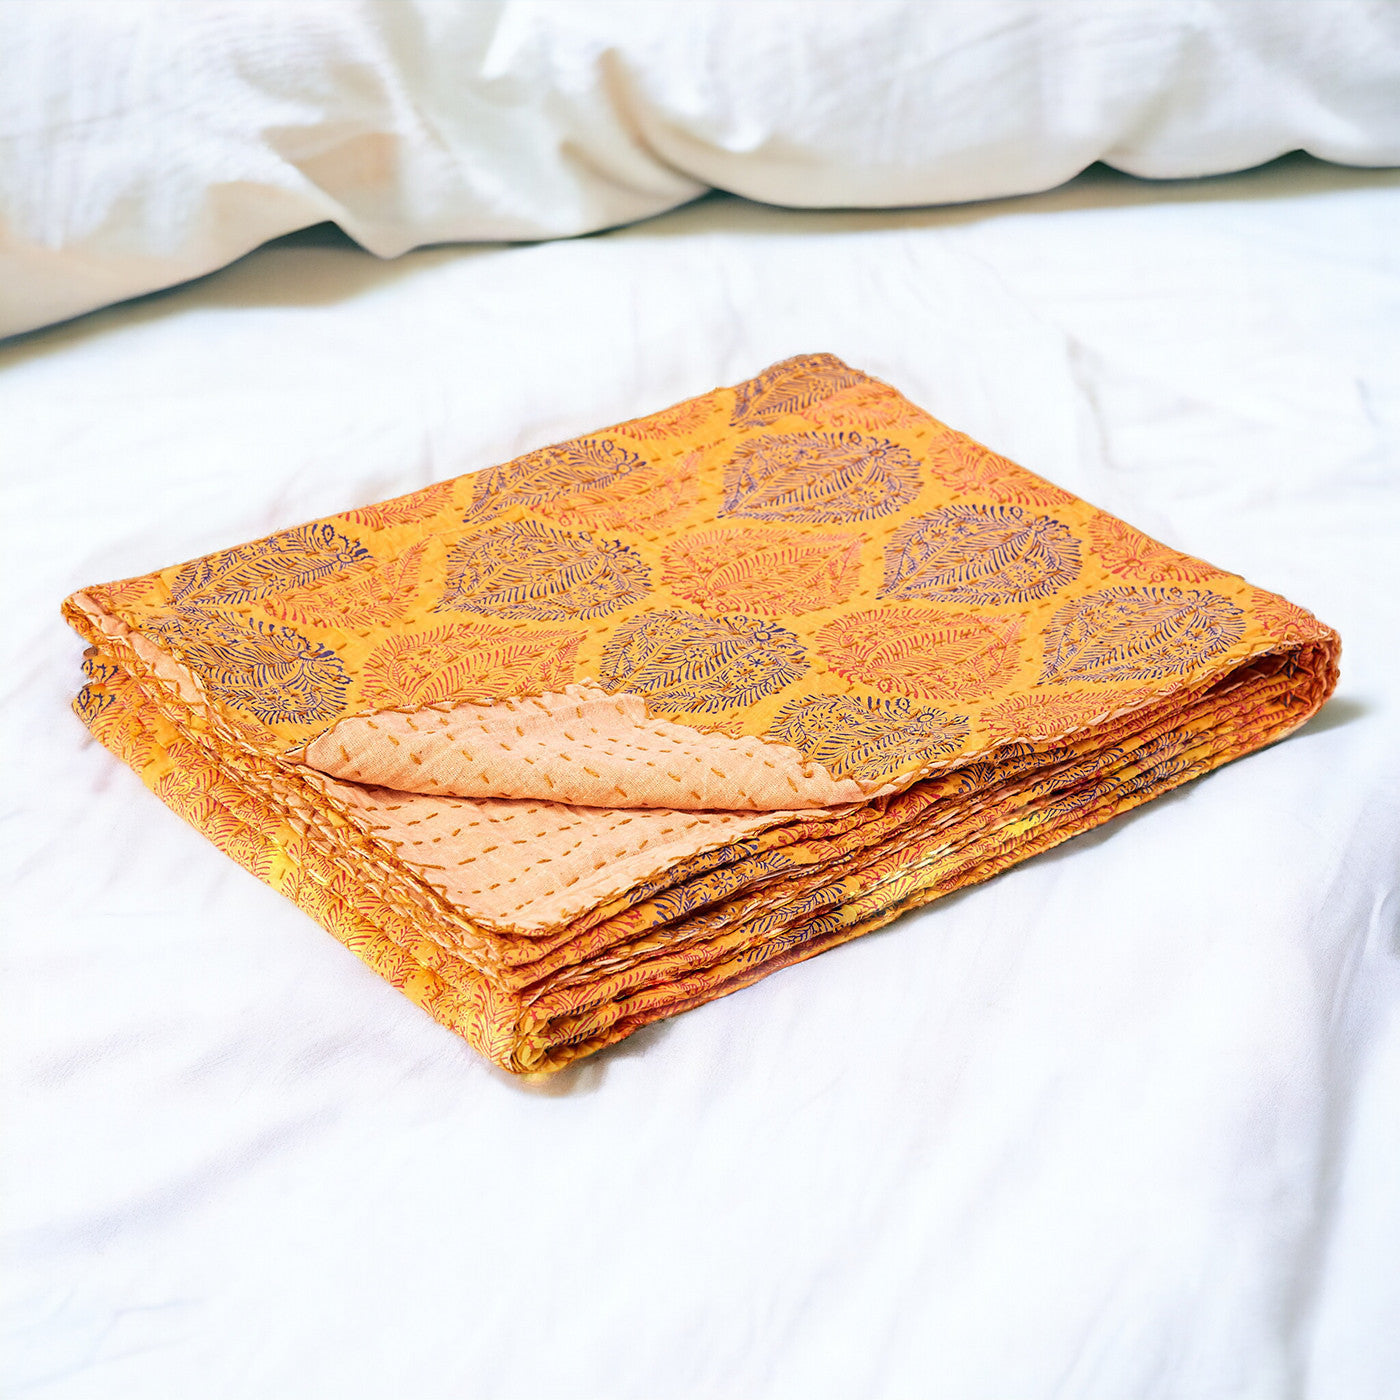 50" X 70" Yellow and Peach Kantha Cotton Patchwork Throw Blanket with Embroidery